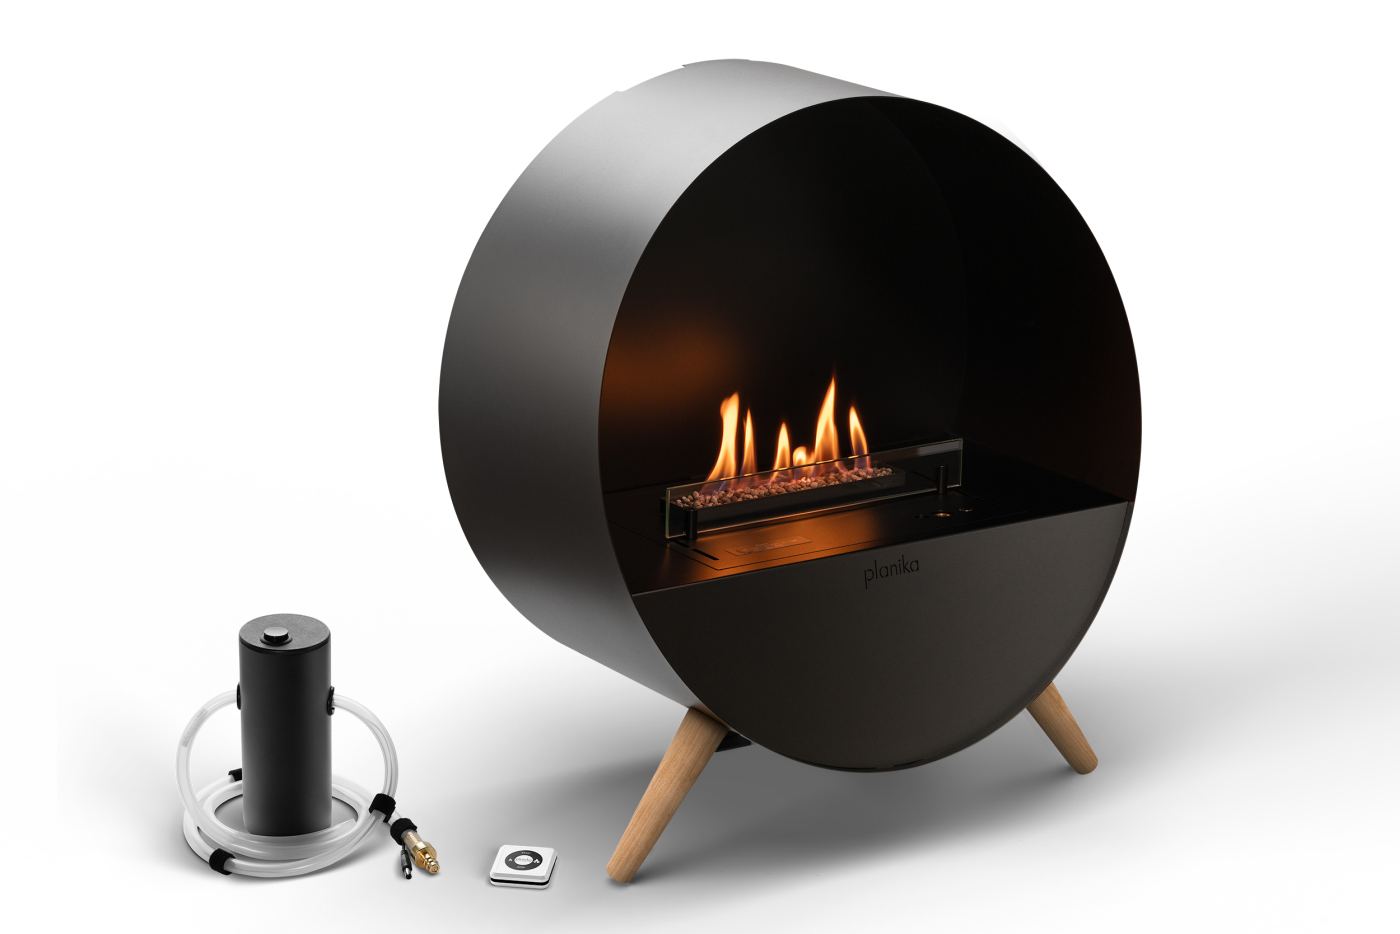 Planika - Wall fireplace - BUBBLE WALL AND FLOOR